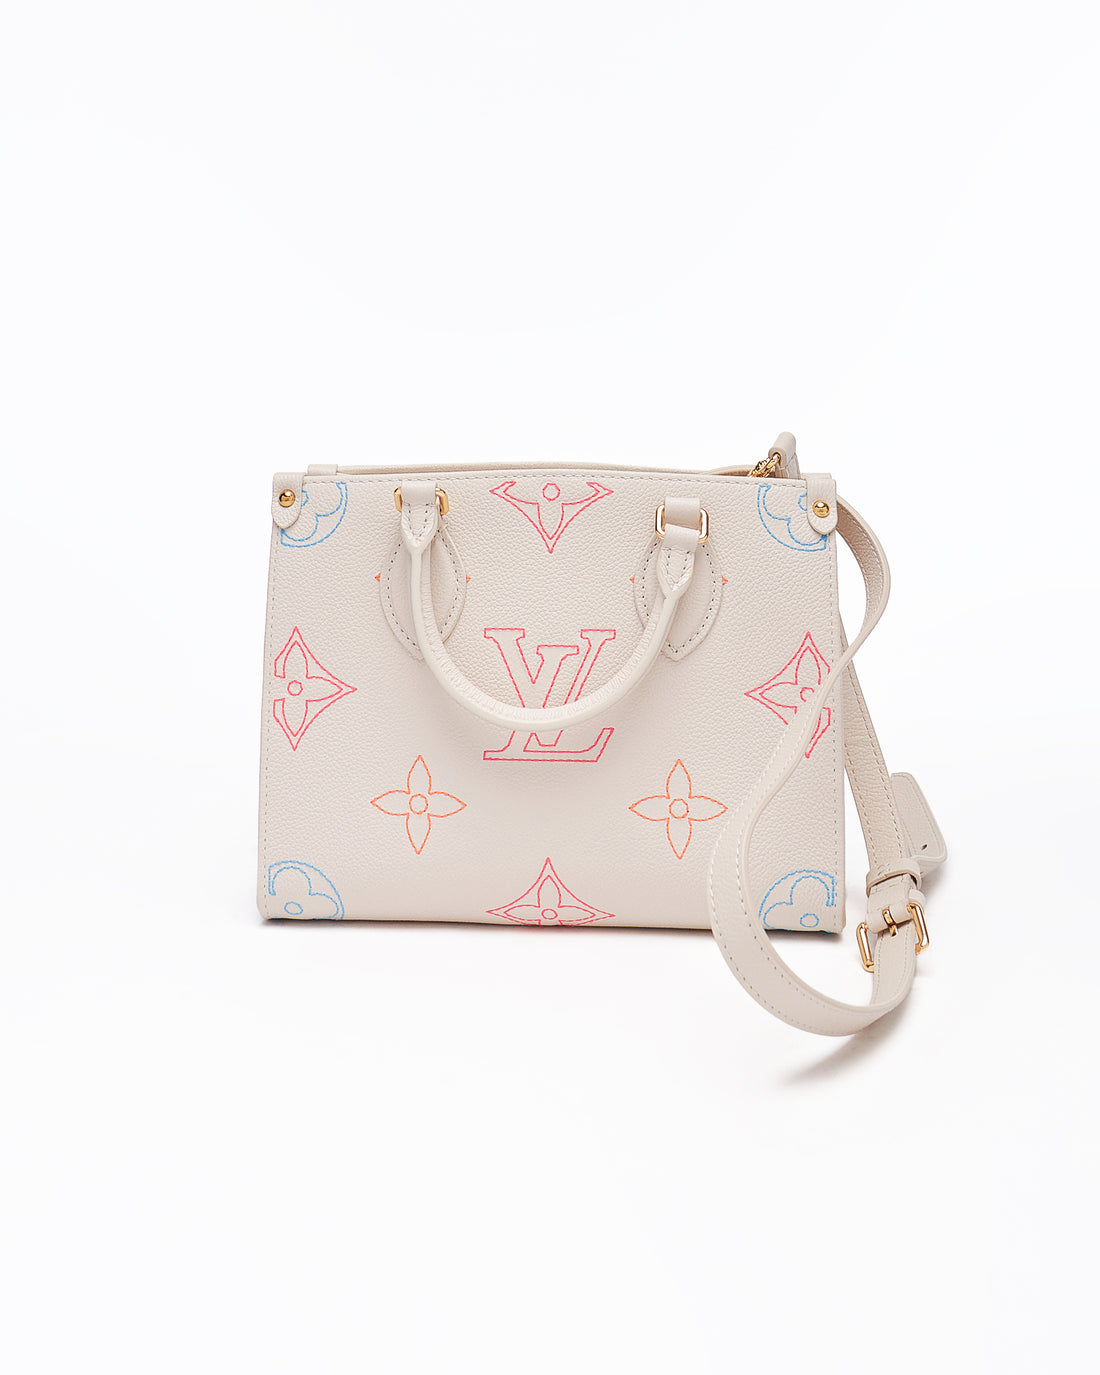 LV Cylinder Lady Bag 79.90 - MOI OUTFIT